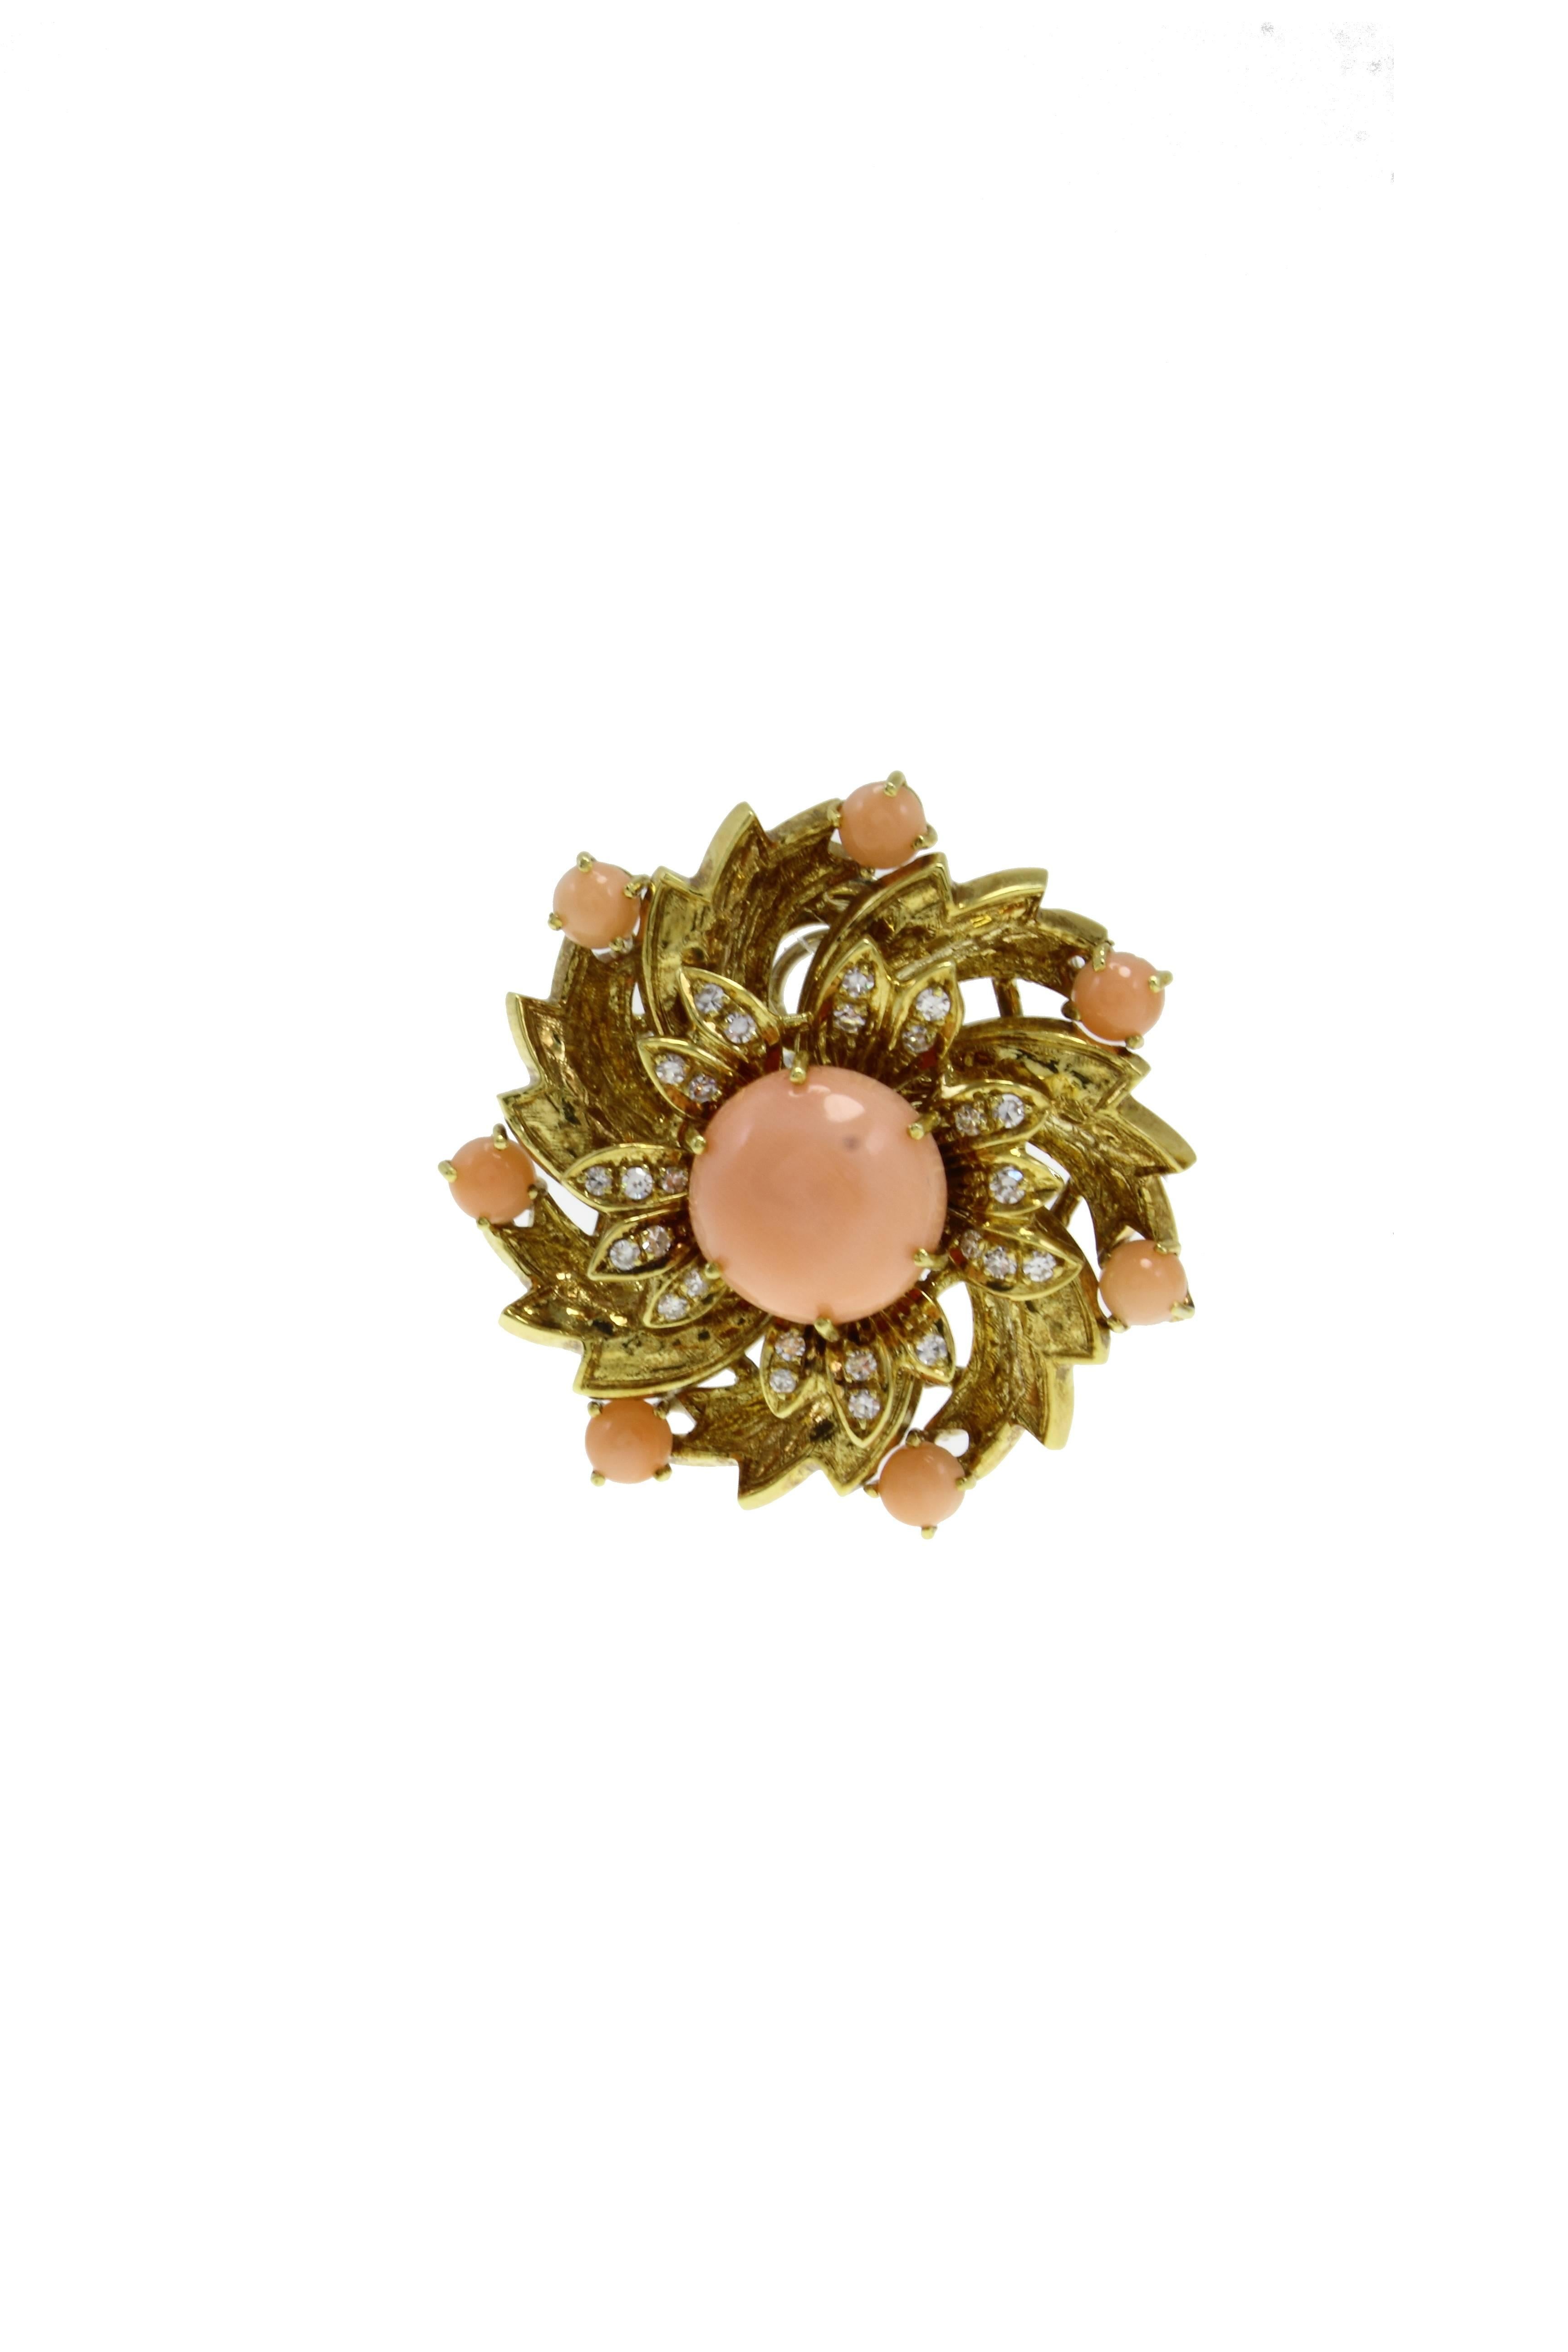 Clip-on flower shaped earrings in 18kt yellow gold composed of a central pink coral surrounded by a crown of diamonds, corals and gold.

diamonds 0.68kt
coral 4.60gr
tot weight 43.4gr
r.f.   gguig